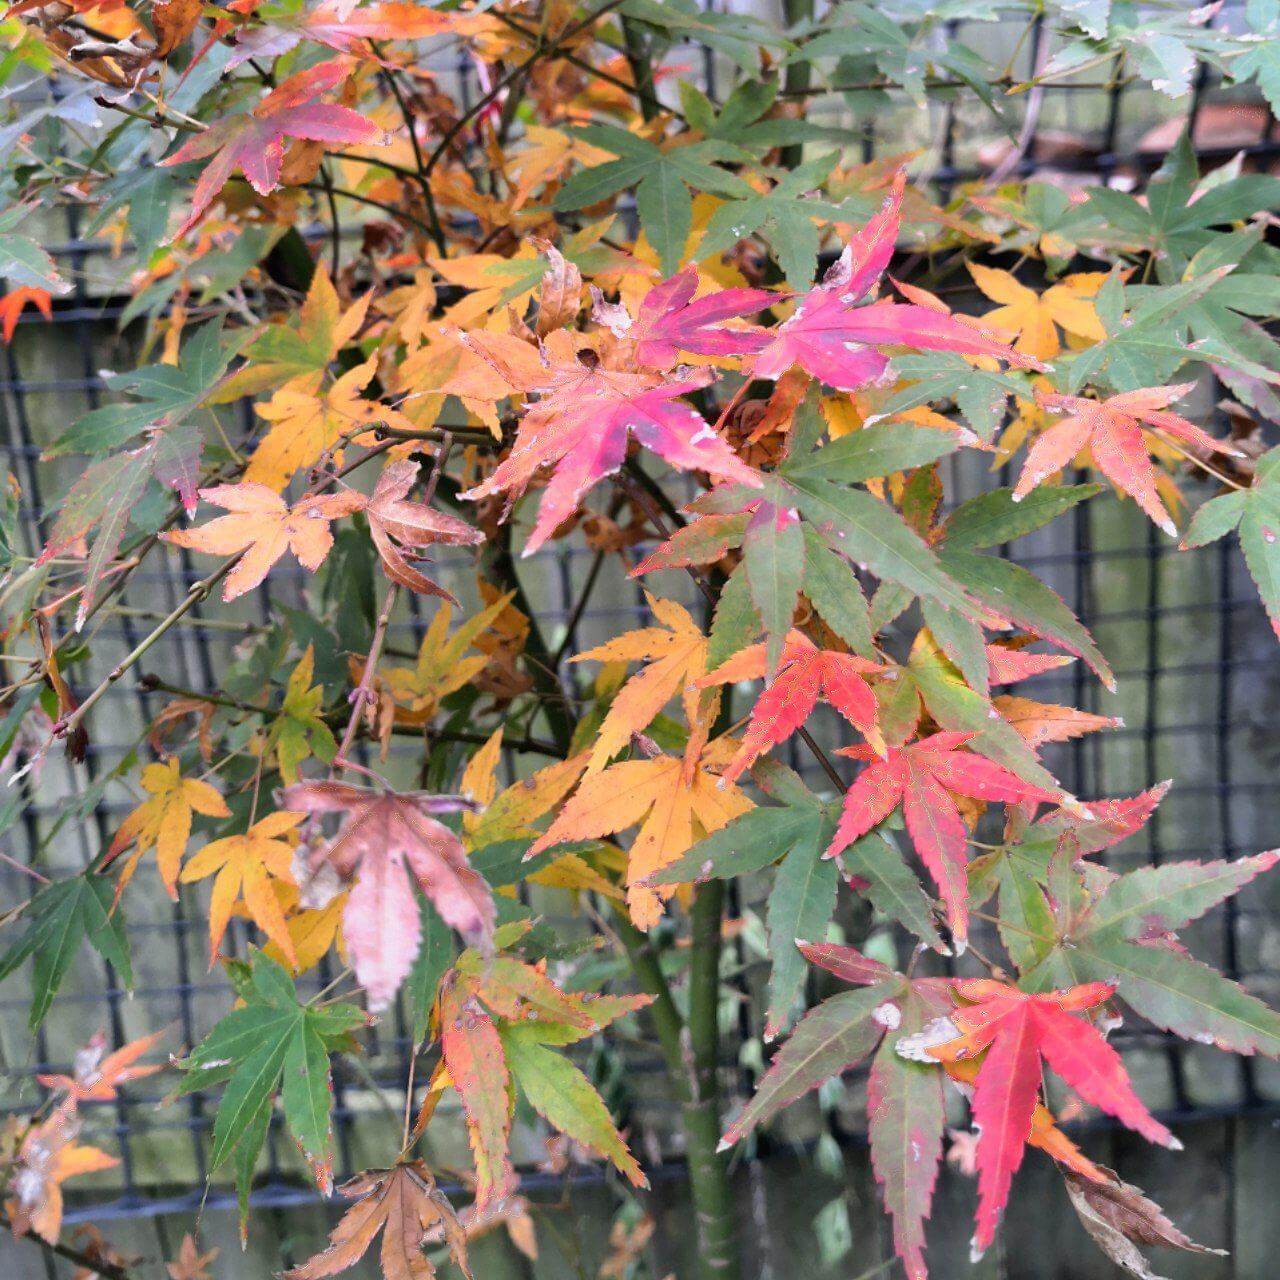 Feature image of Japanese Maple